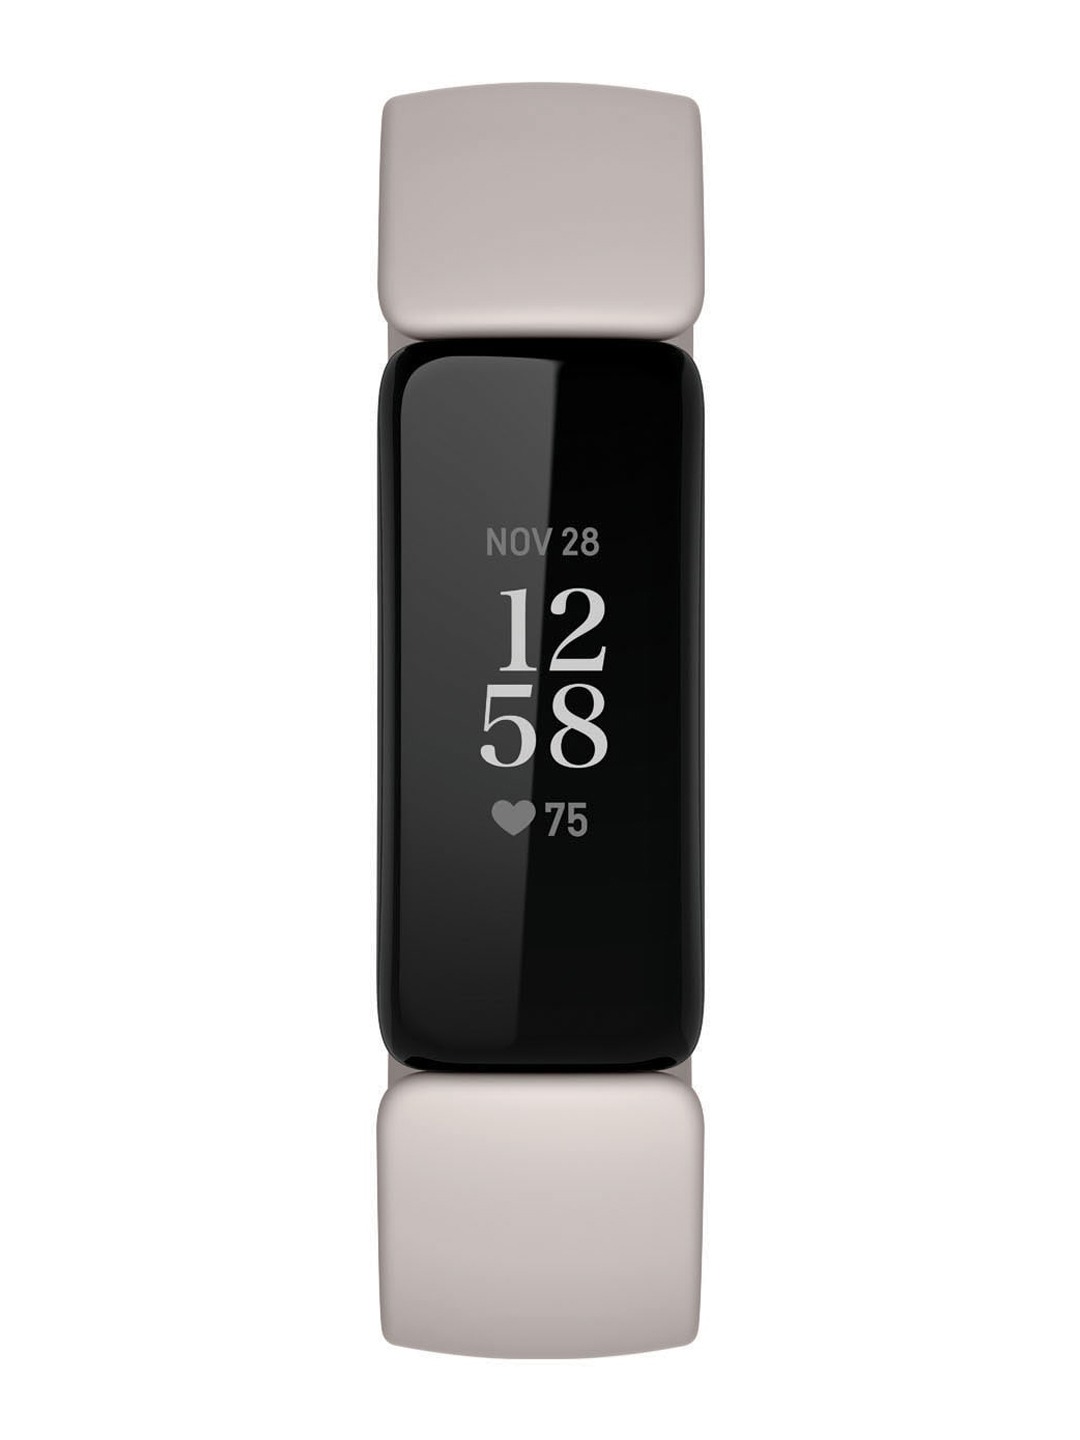 Accessories Fitness Bands | Fitbit Unisex White & Black Inspire 2 Fitness Band - YU34024